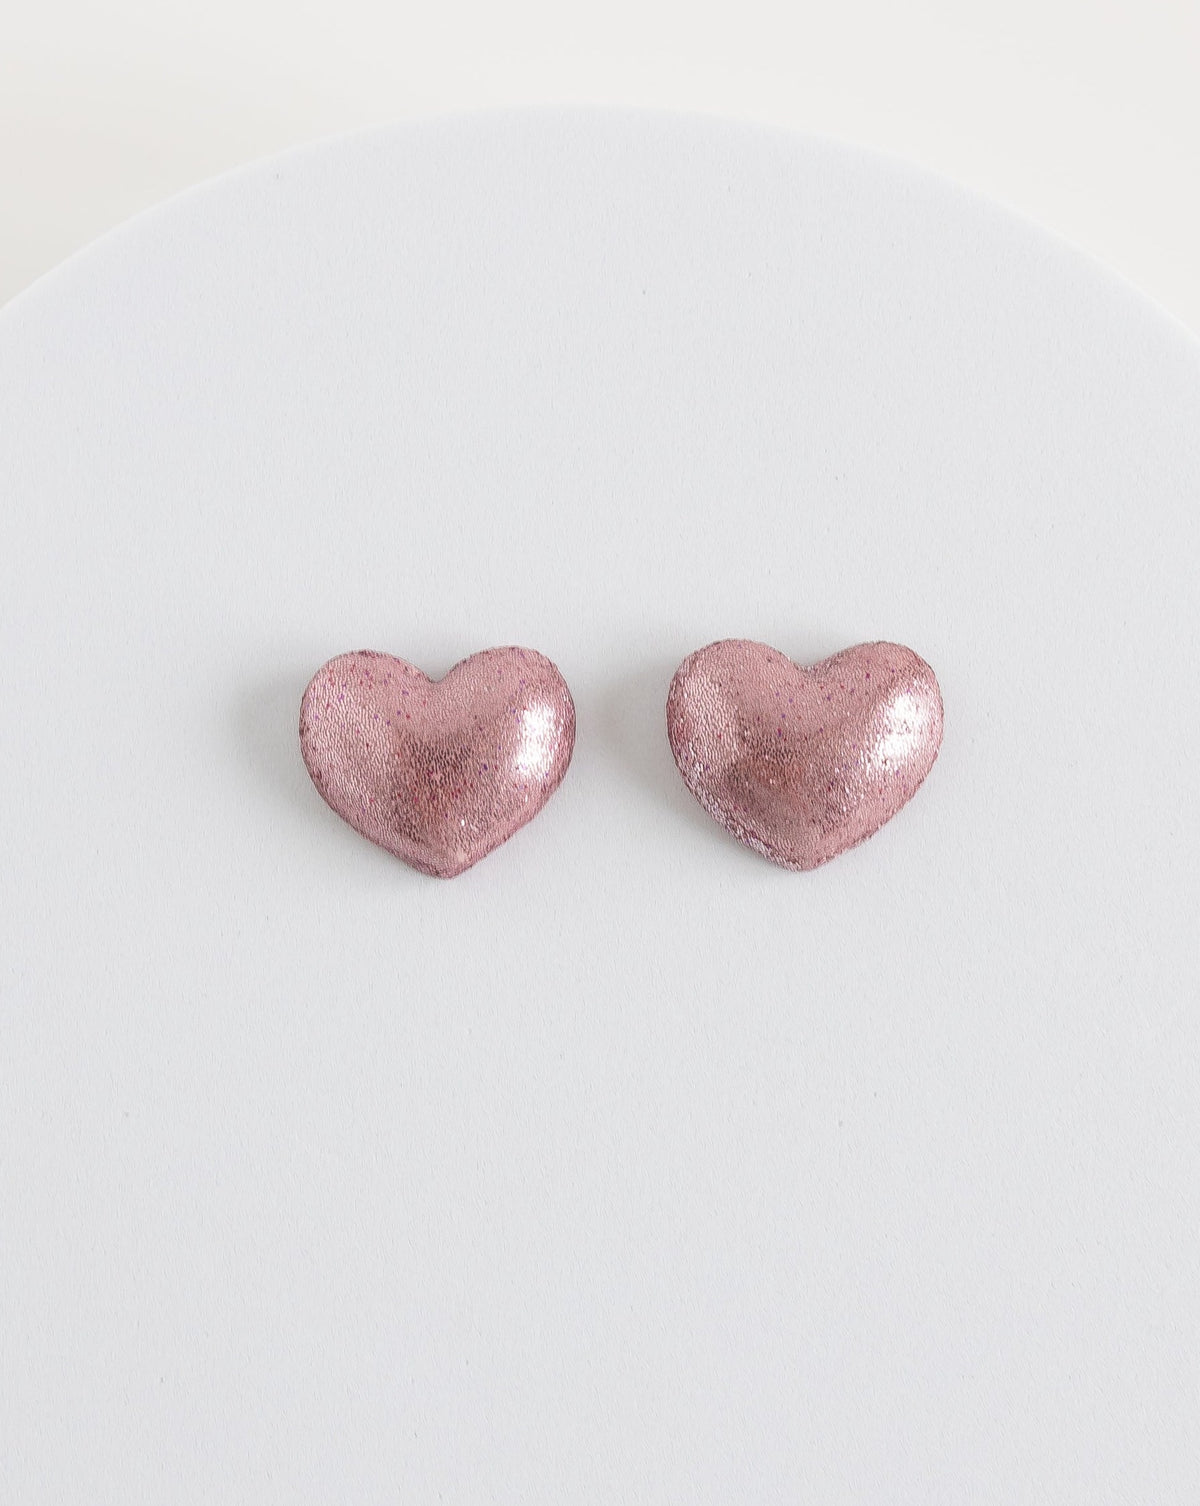 Pink heart stud earrings from LYHO, part of the collection supporting women victims of domestic violence..